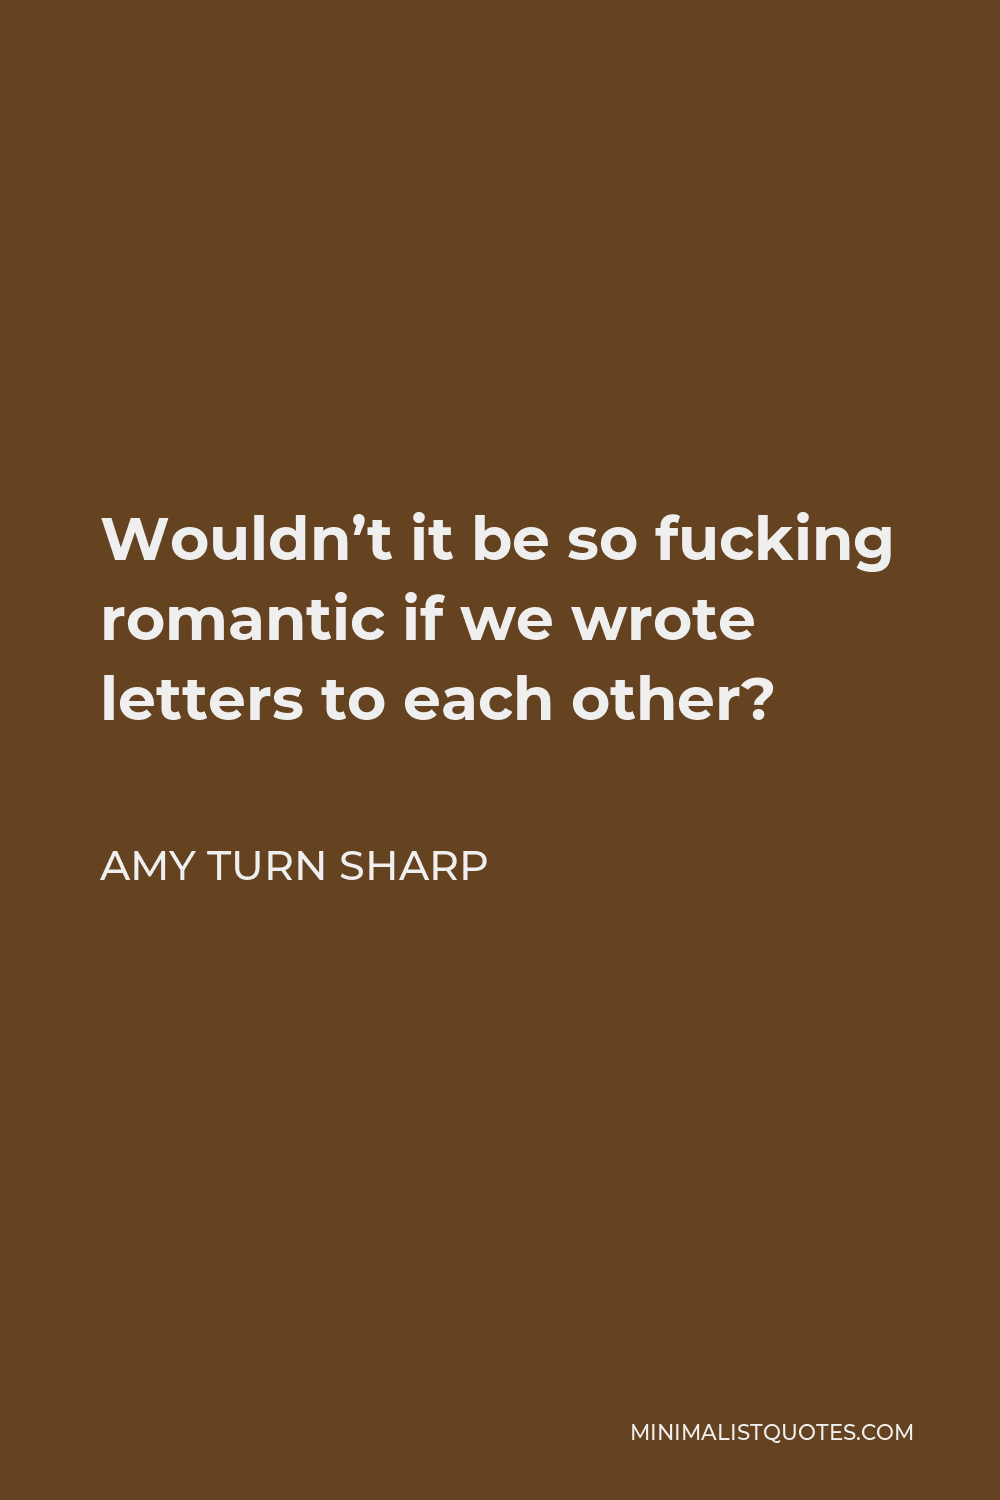 Amy Turn Sharp Quote - Wouldn’t it be so fucking romantic if we wrote letters to each other?